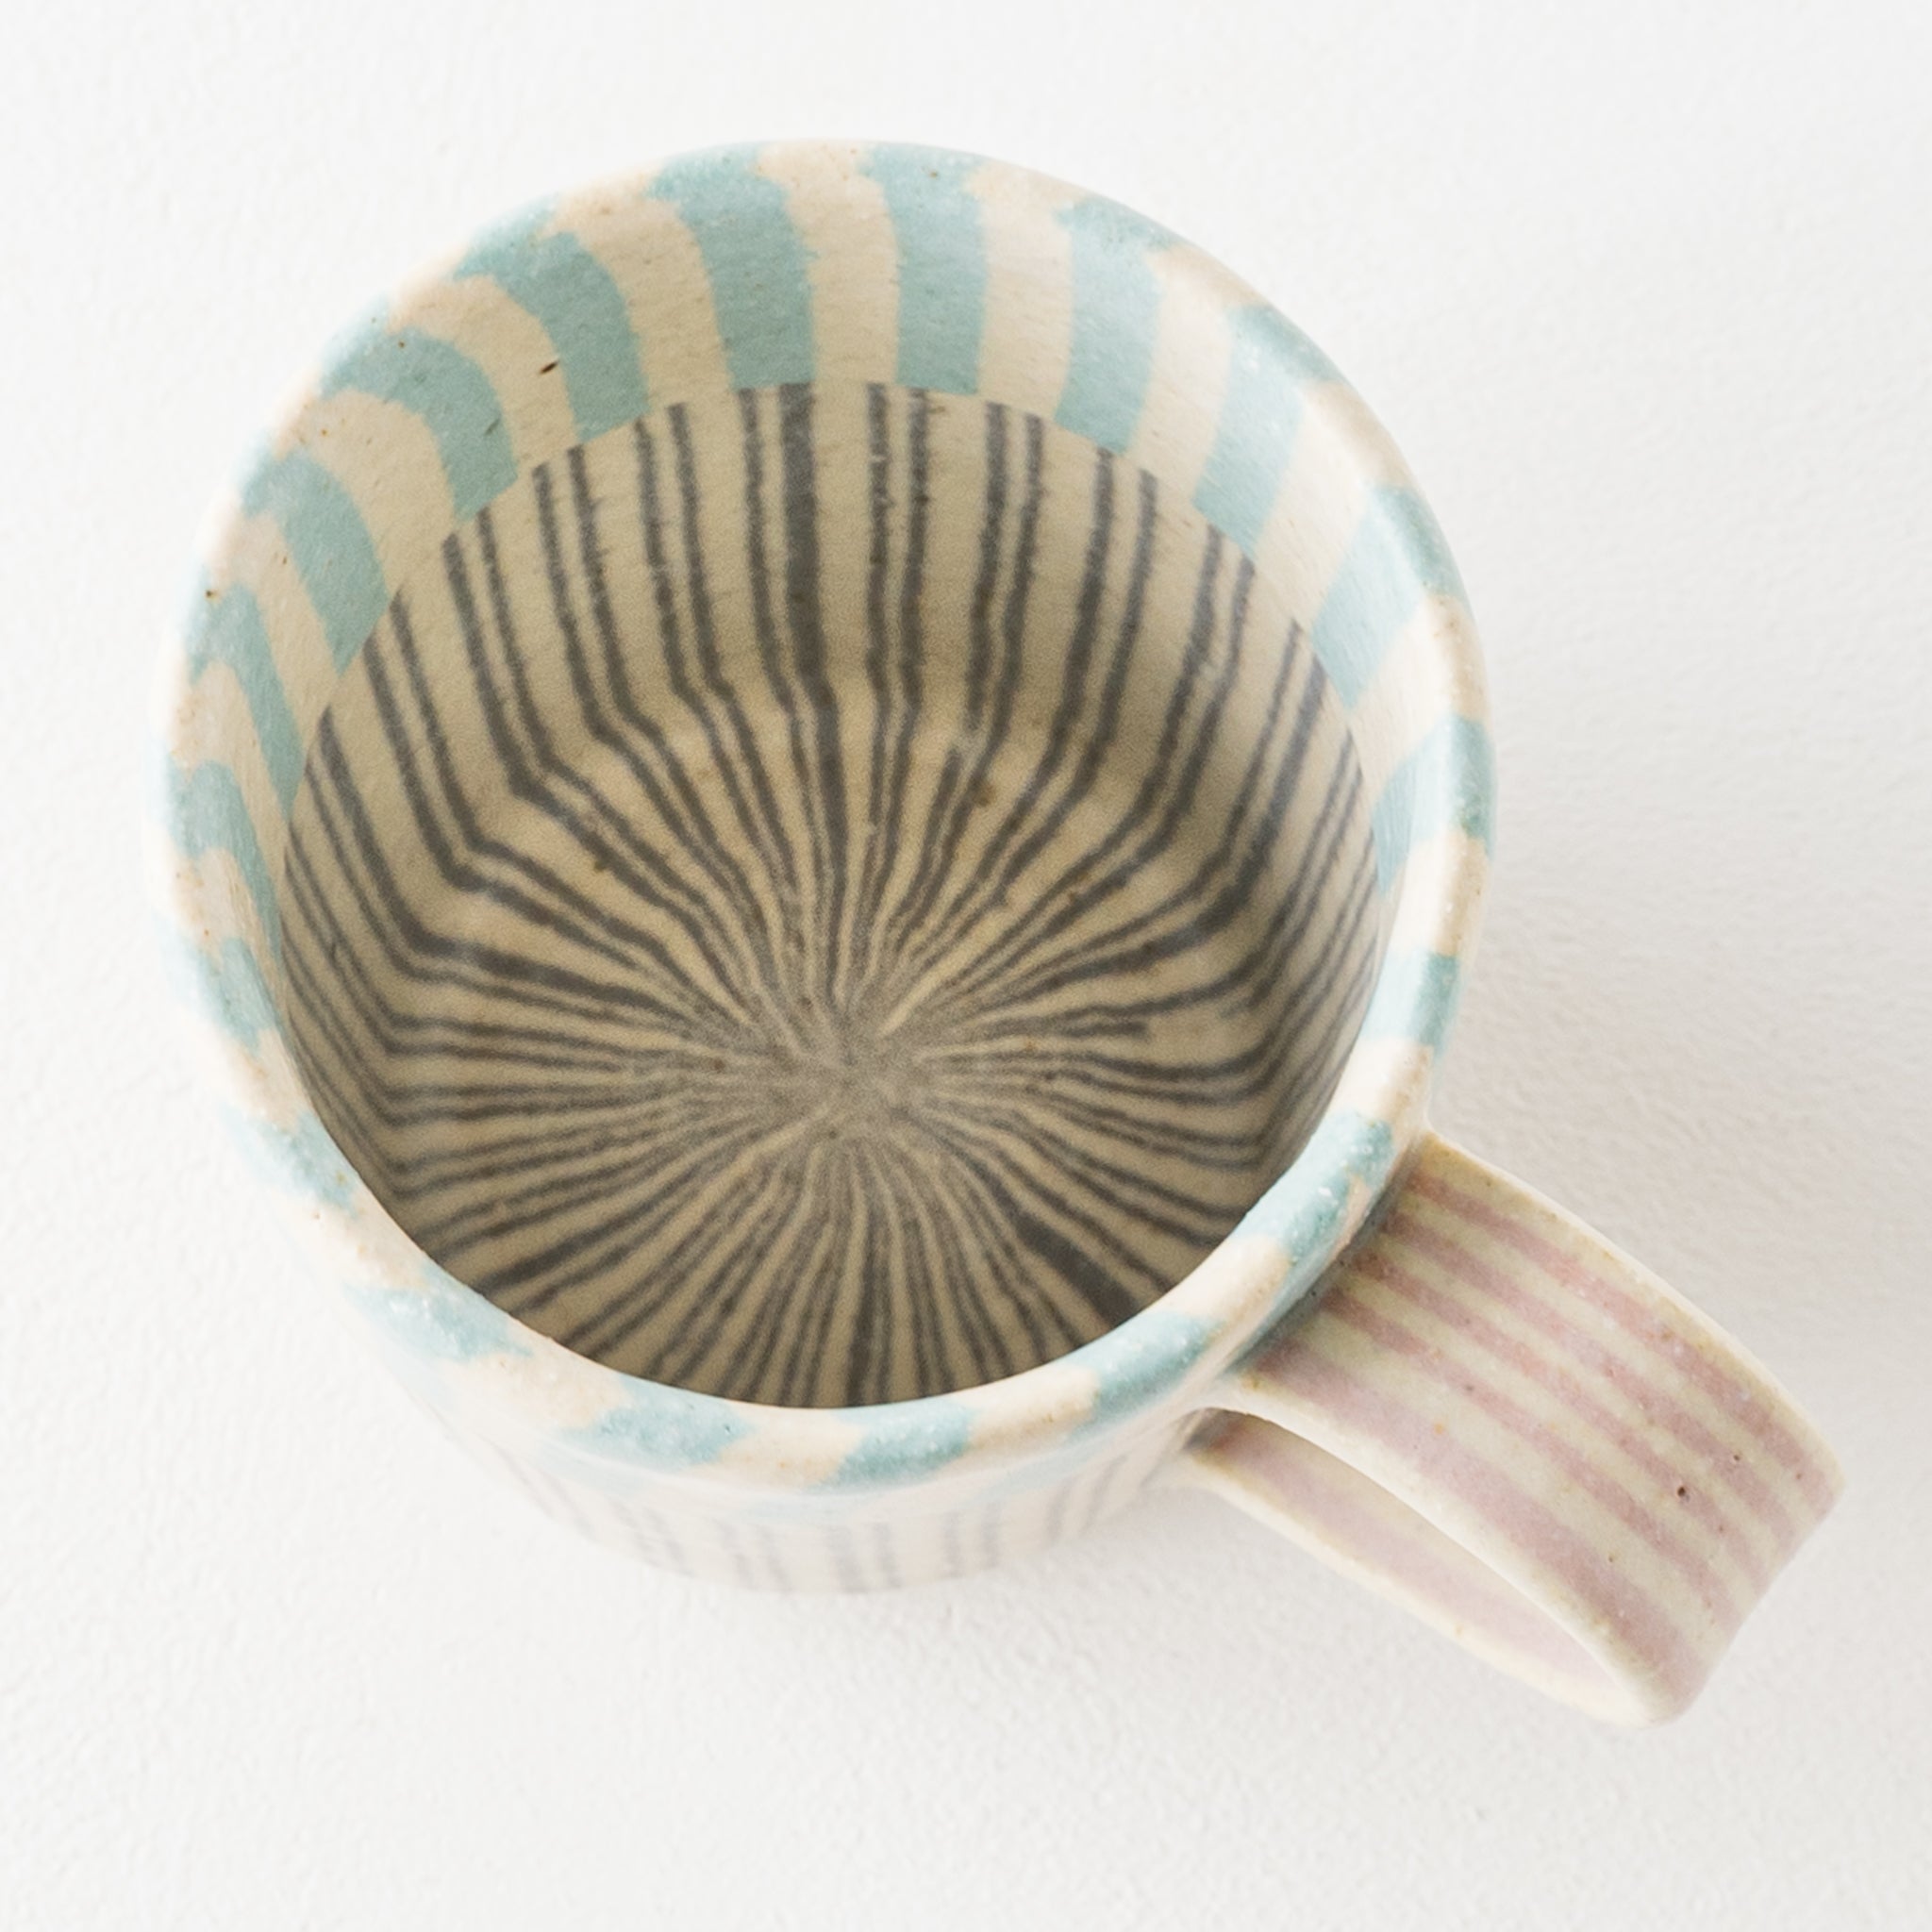 Hanako Sakashita's kneaded mug that is soothing with cute patterns on the inside and outside